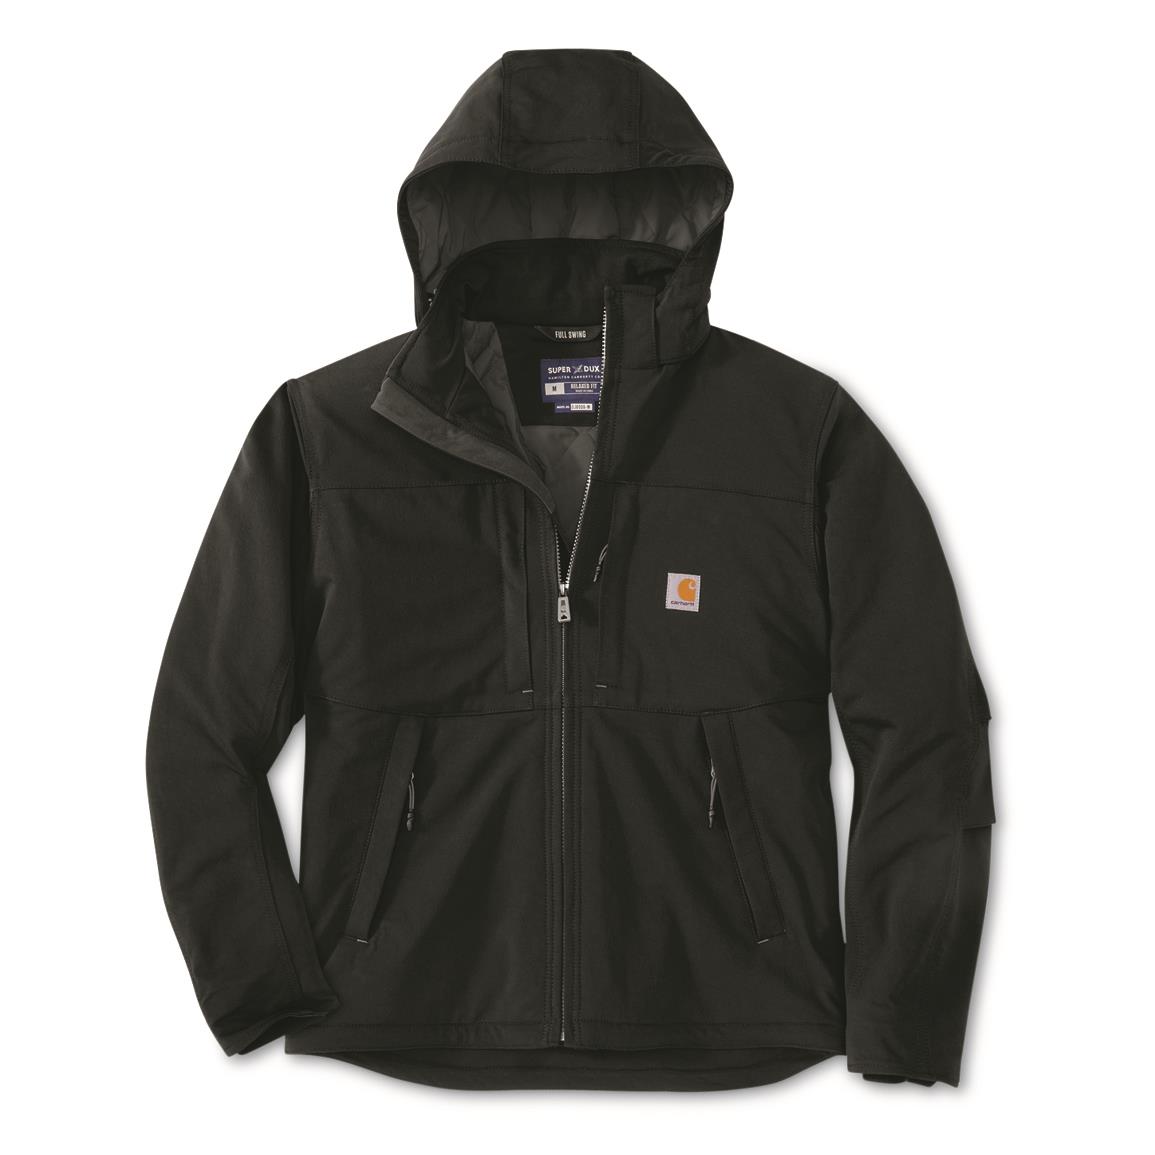 Carhartt Men's Super Dux Relaxed Fit Insulated Jacket, Black